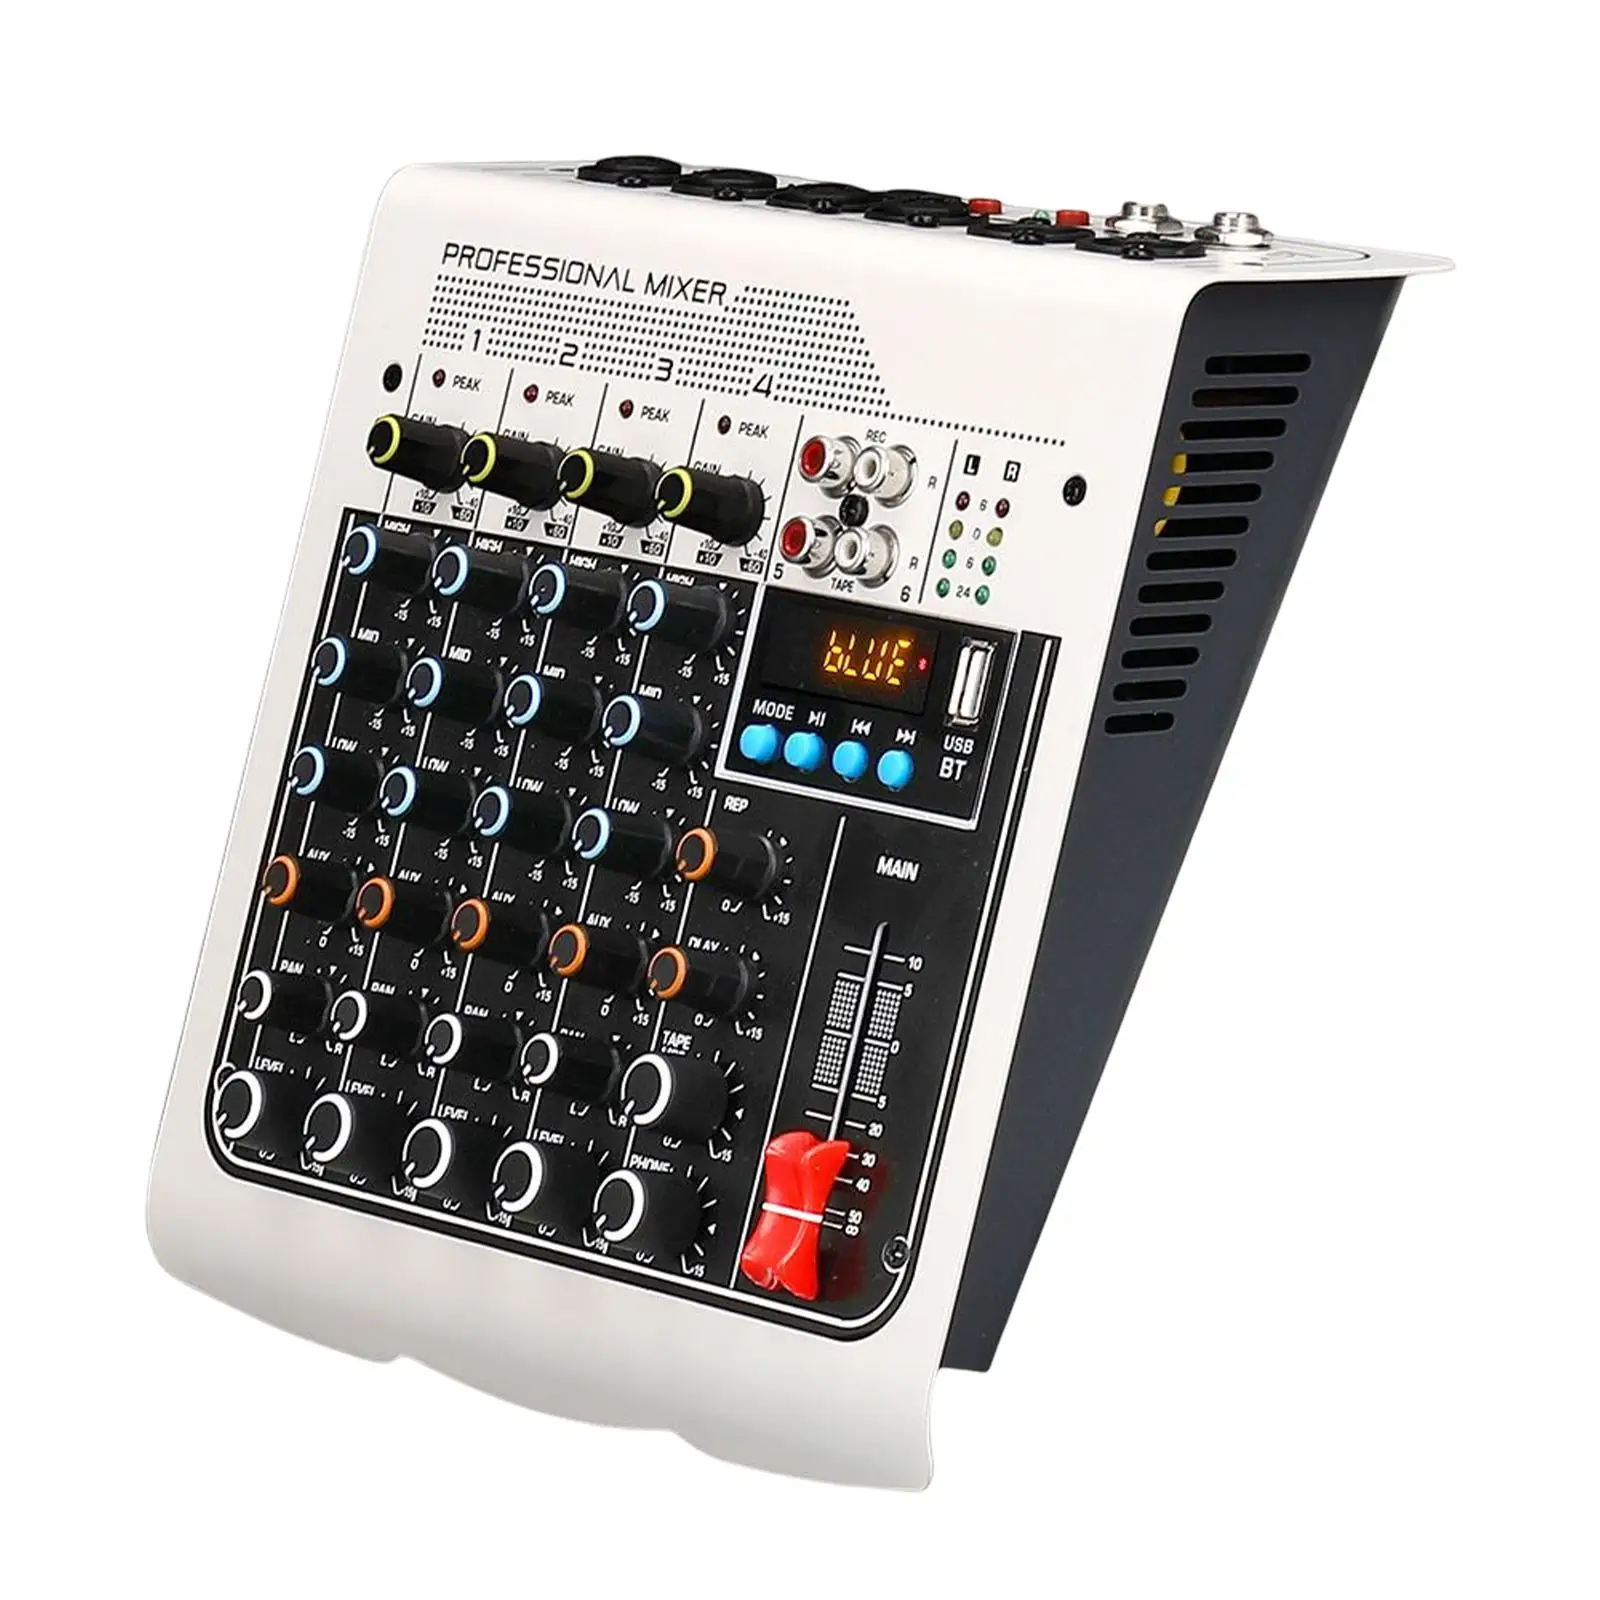 6 Channel Audio Mixer Microphone in Sound Mixing Console Headphone Jack MP3 Computer Input Stereo for Podcasting Party Recording